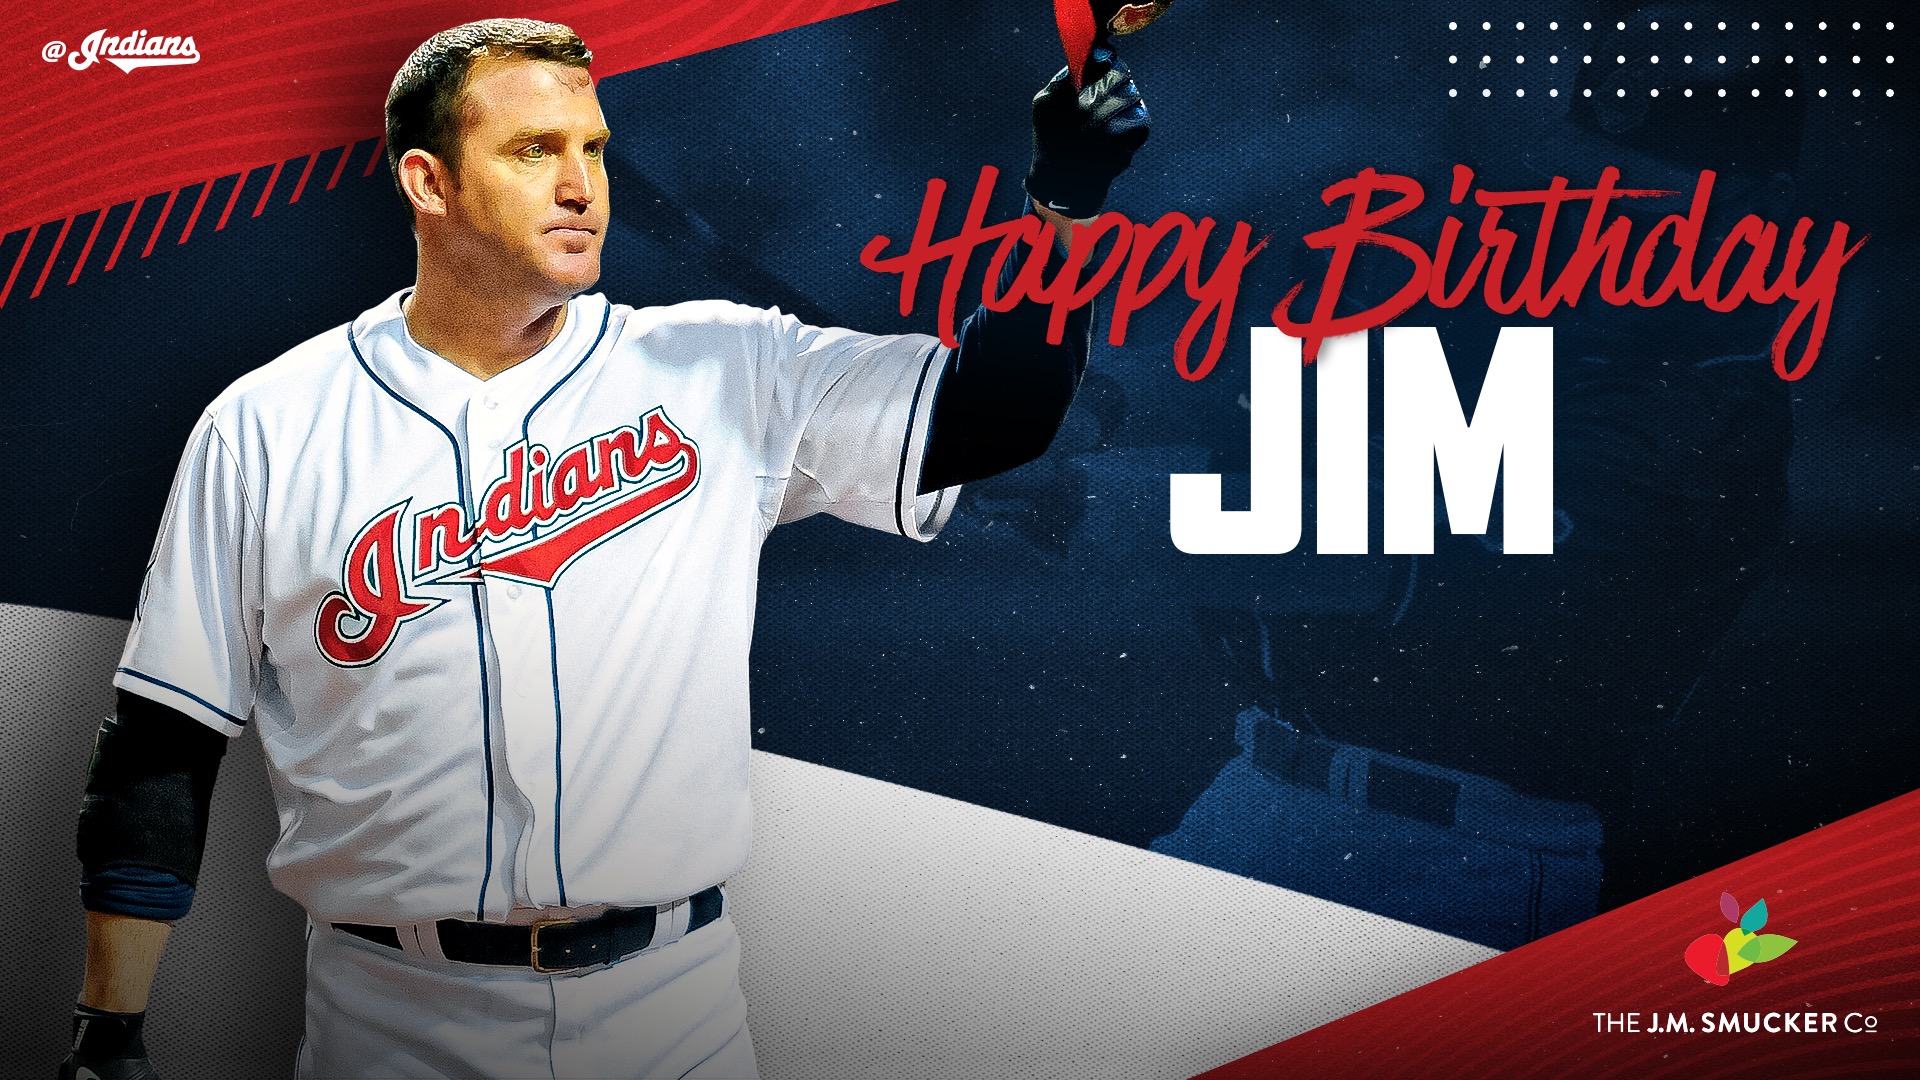 Happy Birthday to my all time favorite Indian Jim Thome! 